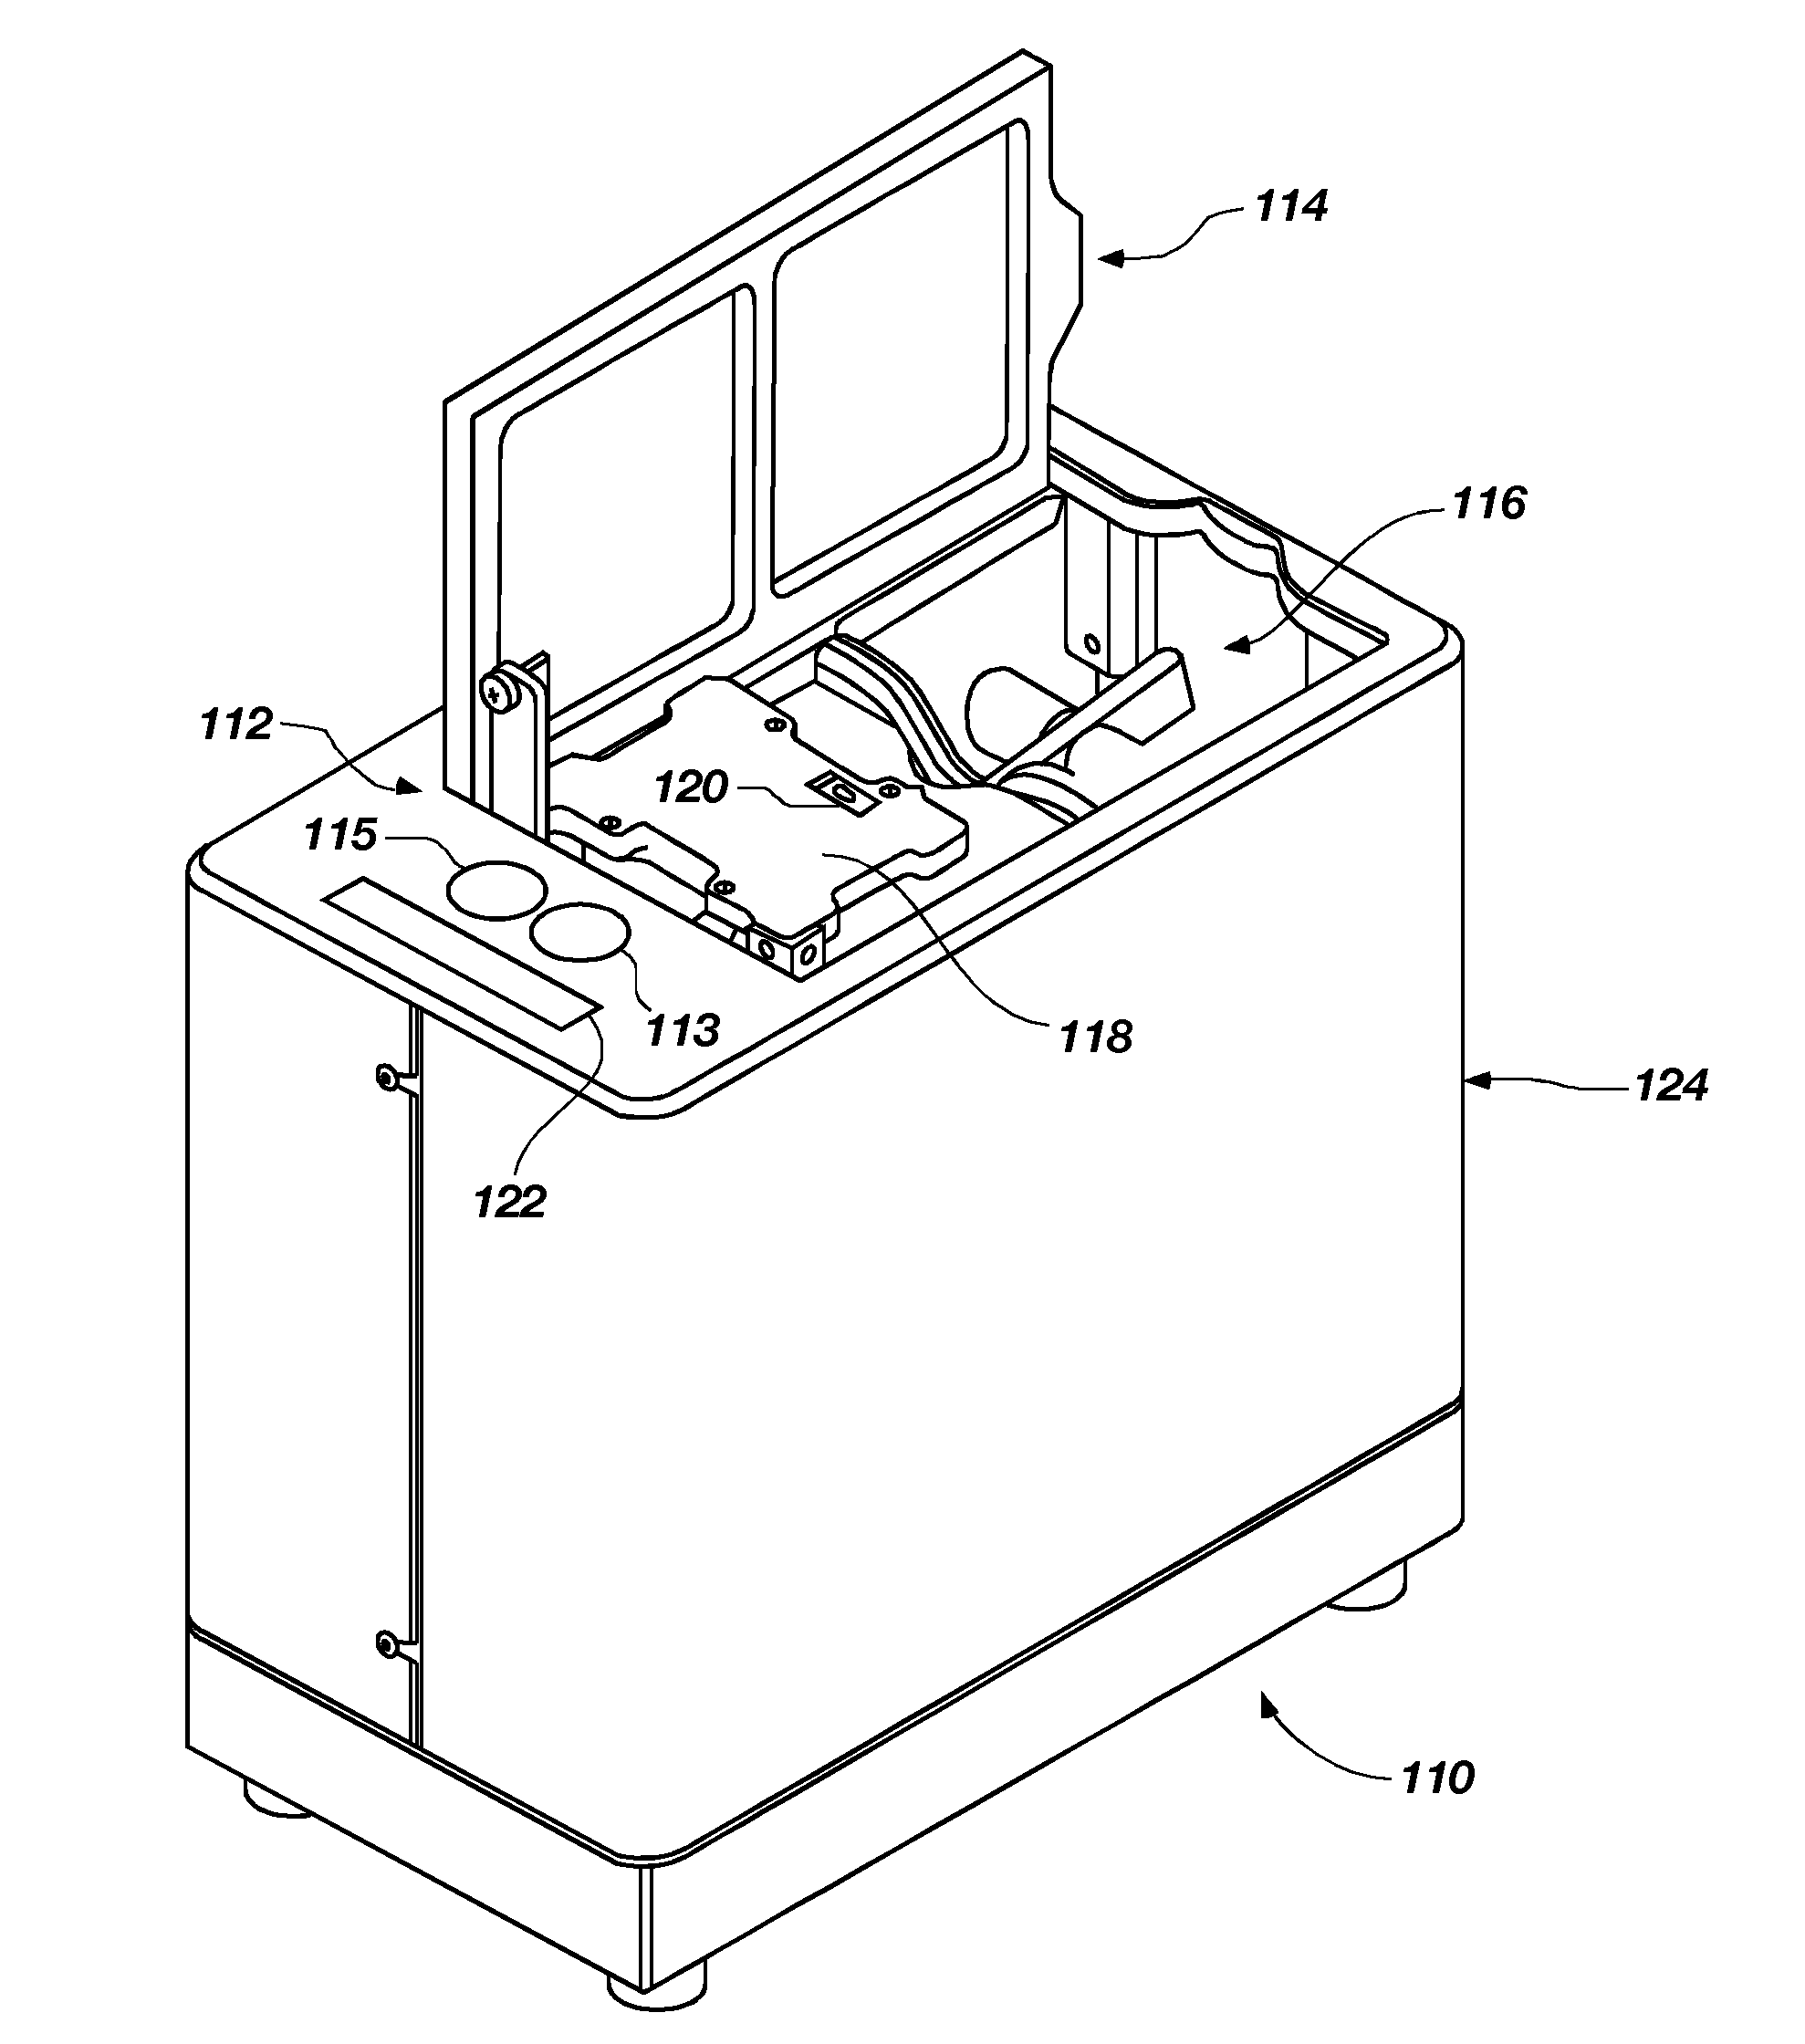 Methods and apparatuses for an automatic card handling device and communication networks including same